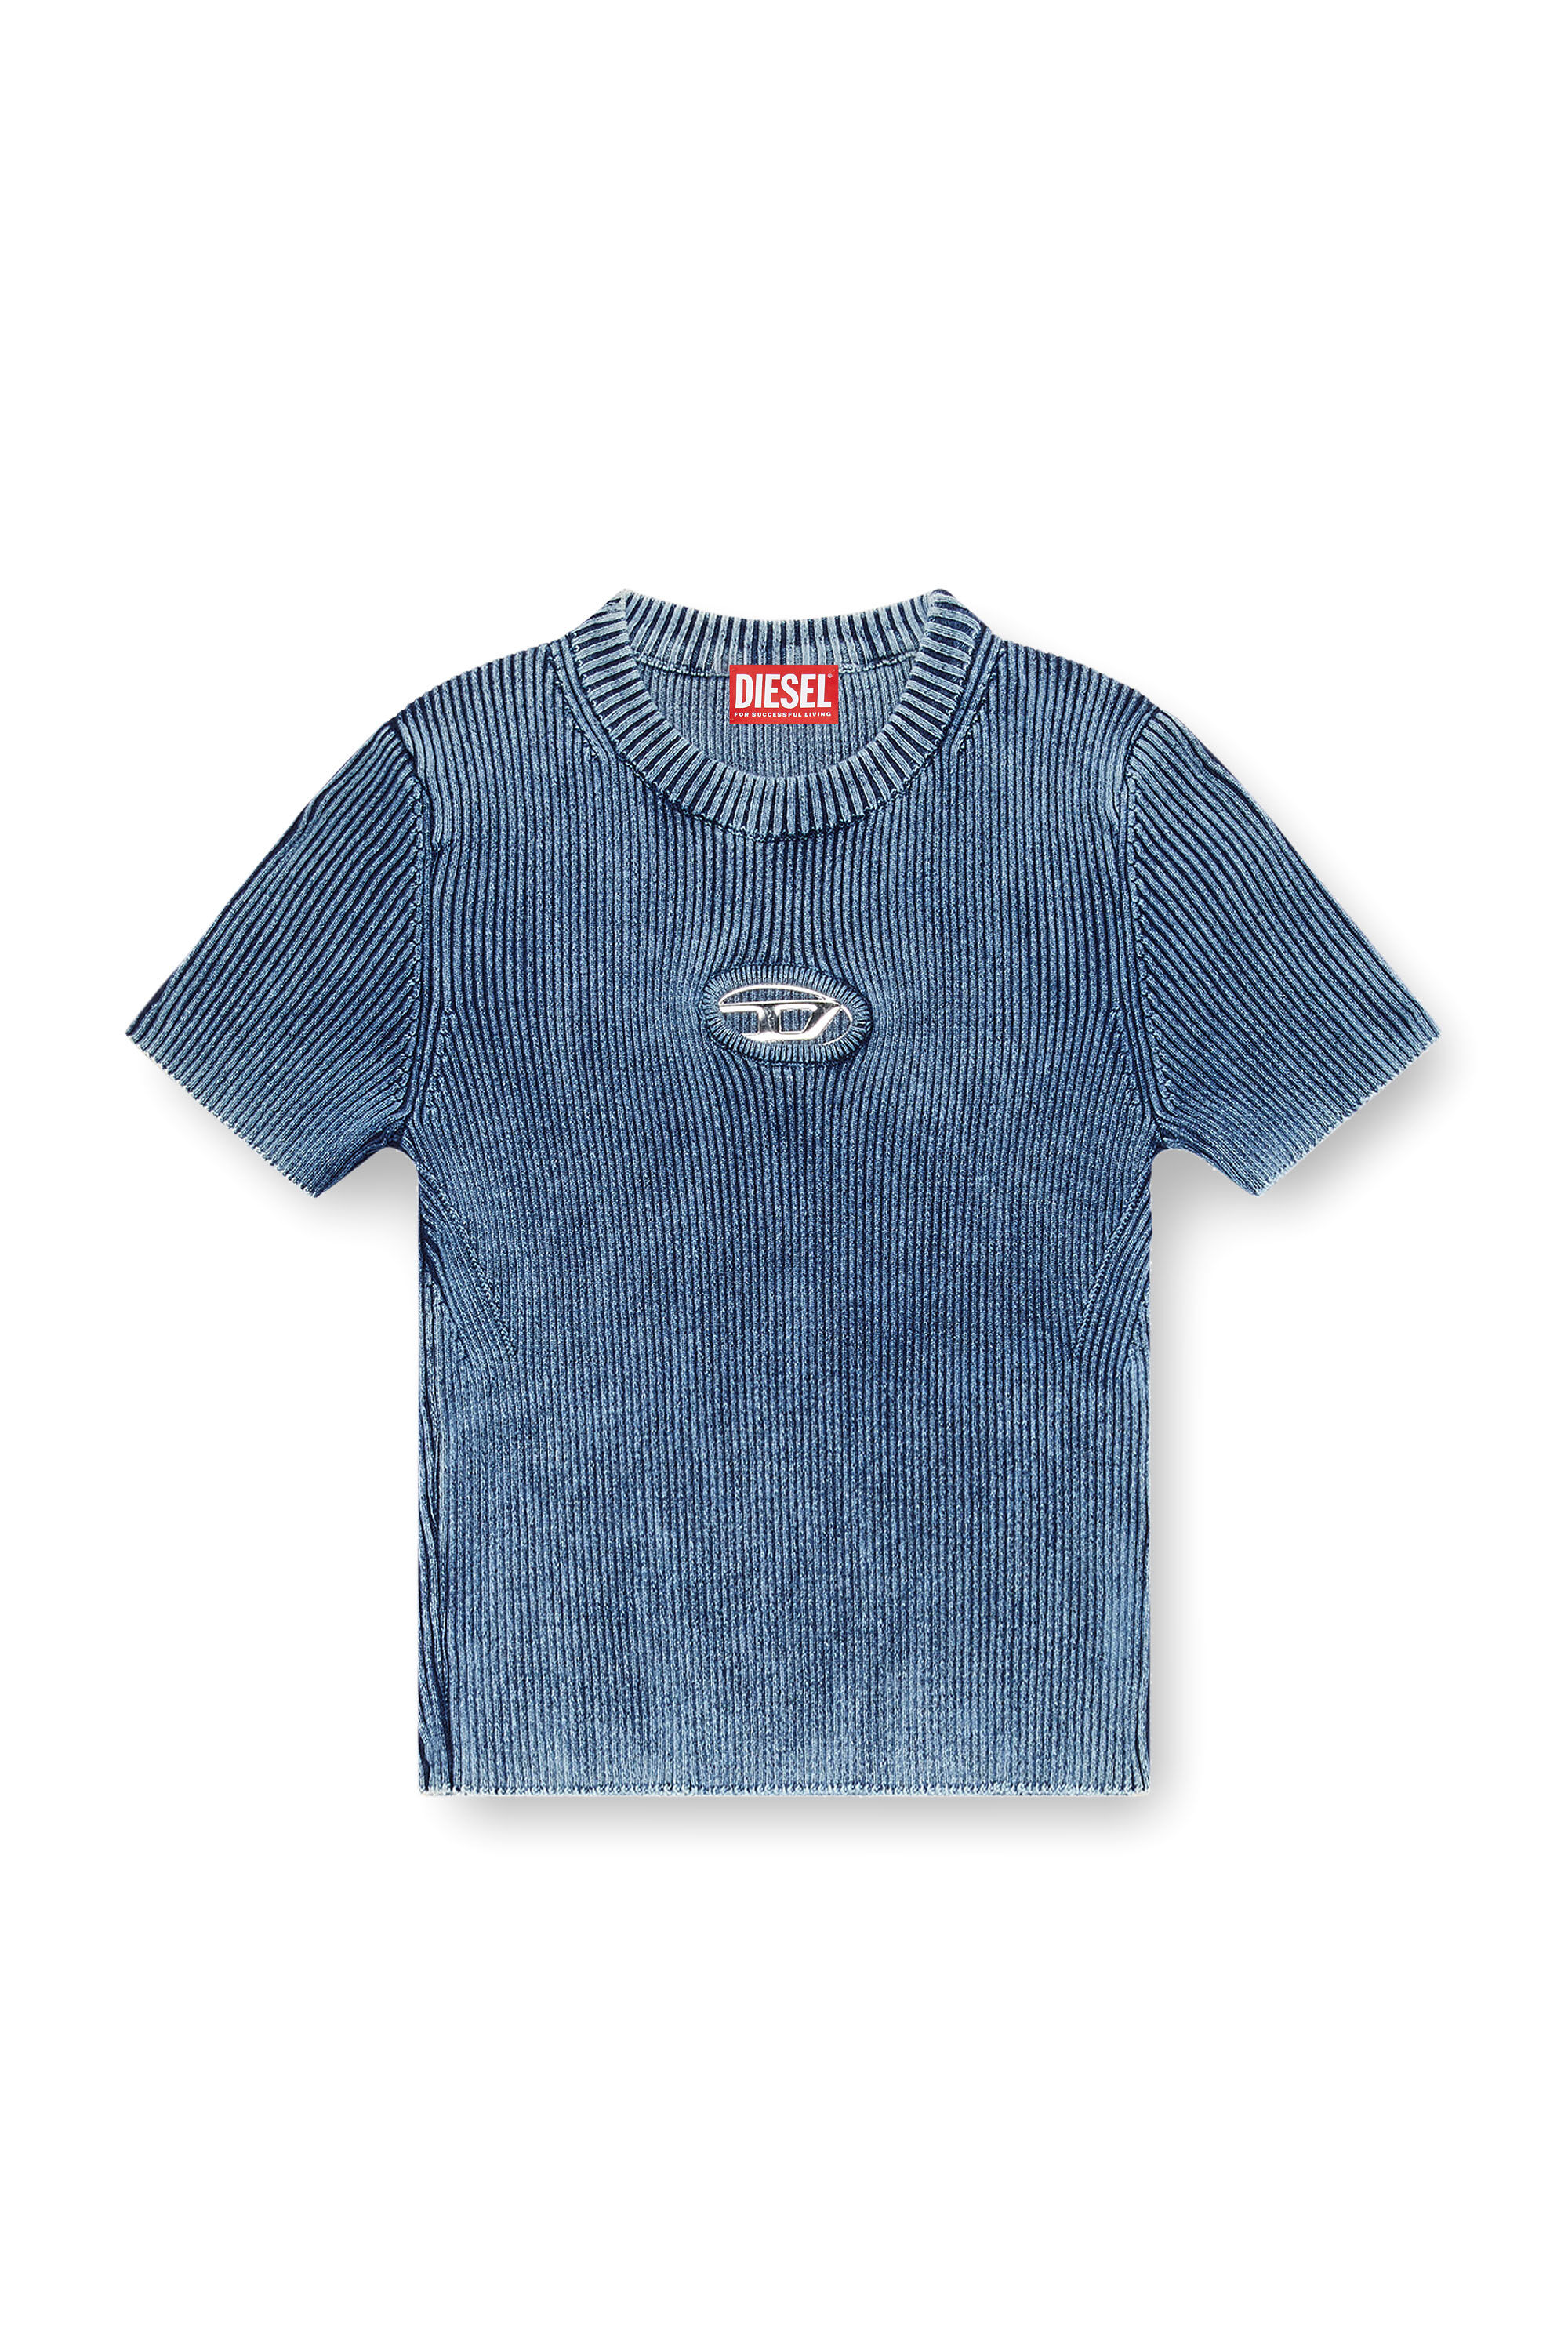 Diesel - M-ANCHOR-A-SS, Female Knitted crop top with denim effect in ブルー - Image 2